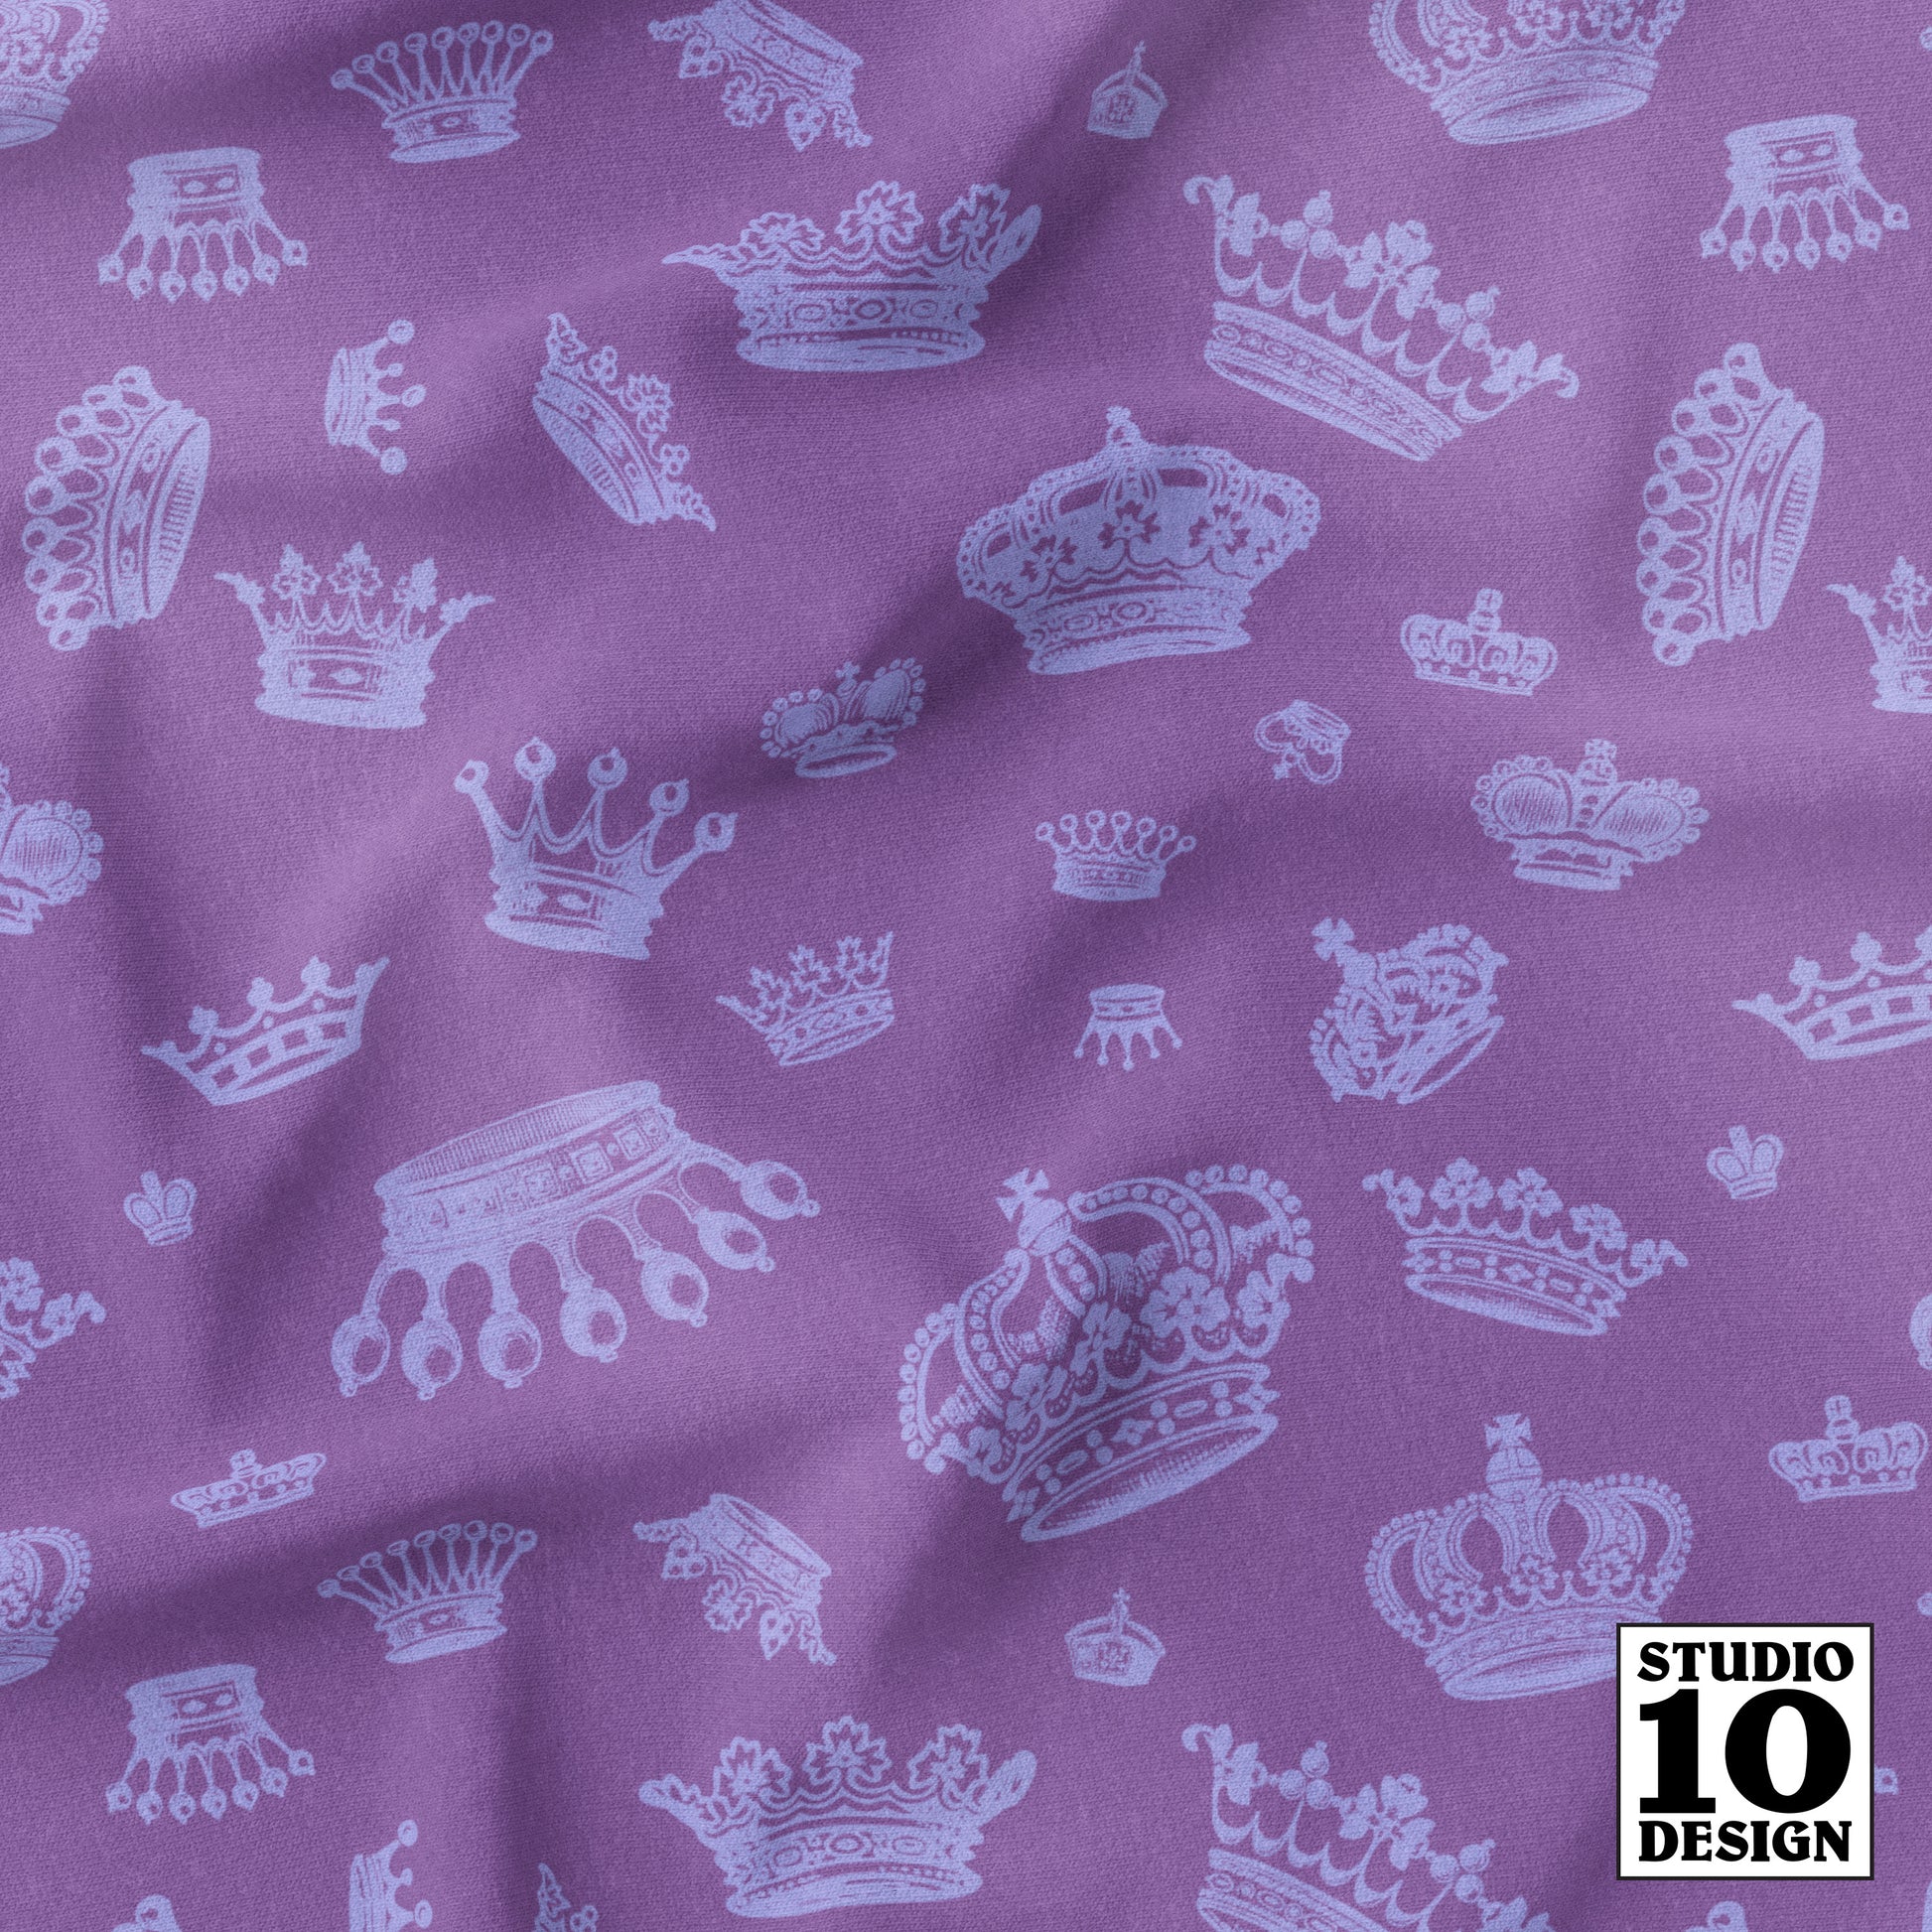 Royal Crowns Lilac+Orchid Printed Fabric by Studio Ten Design